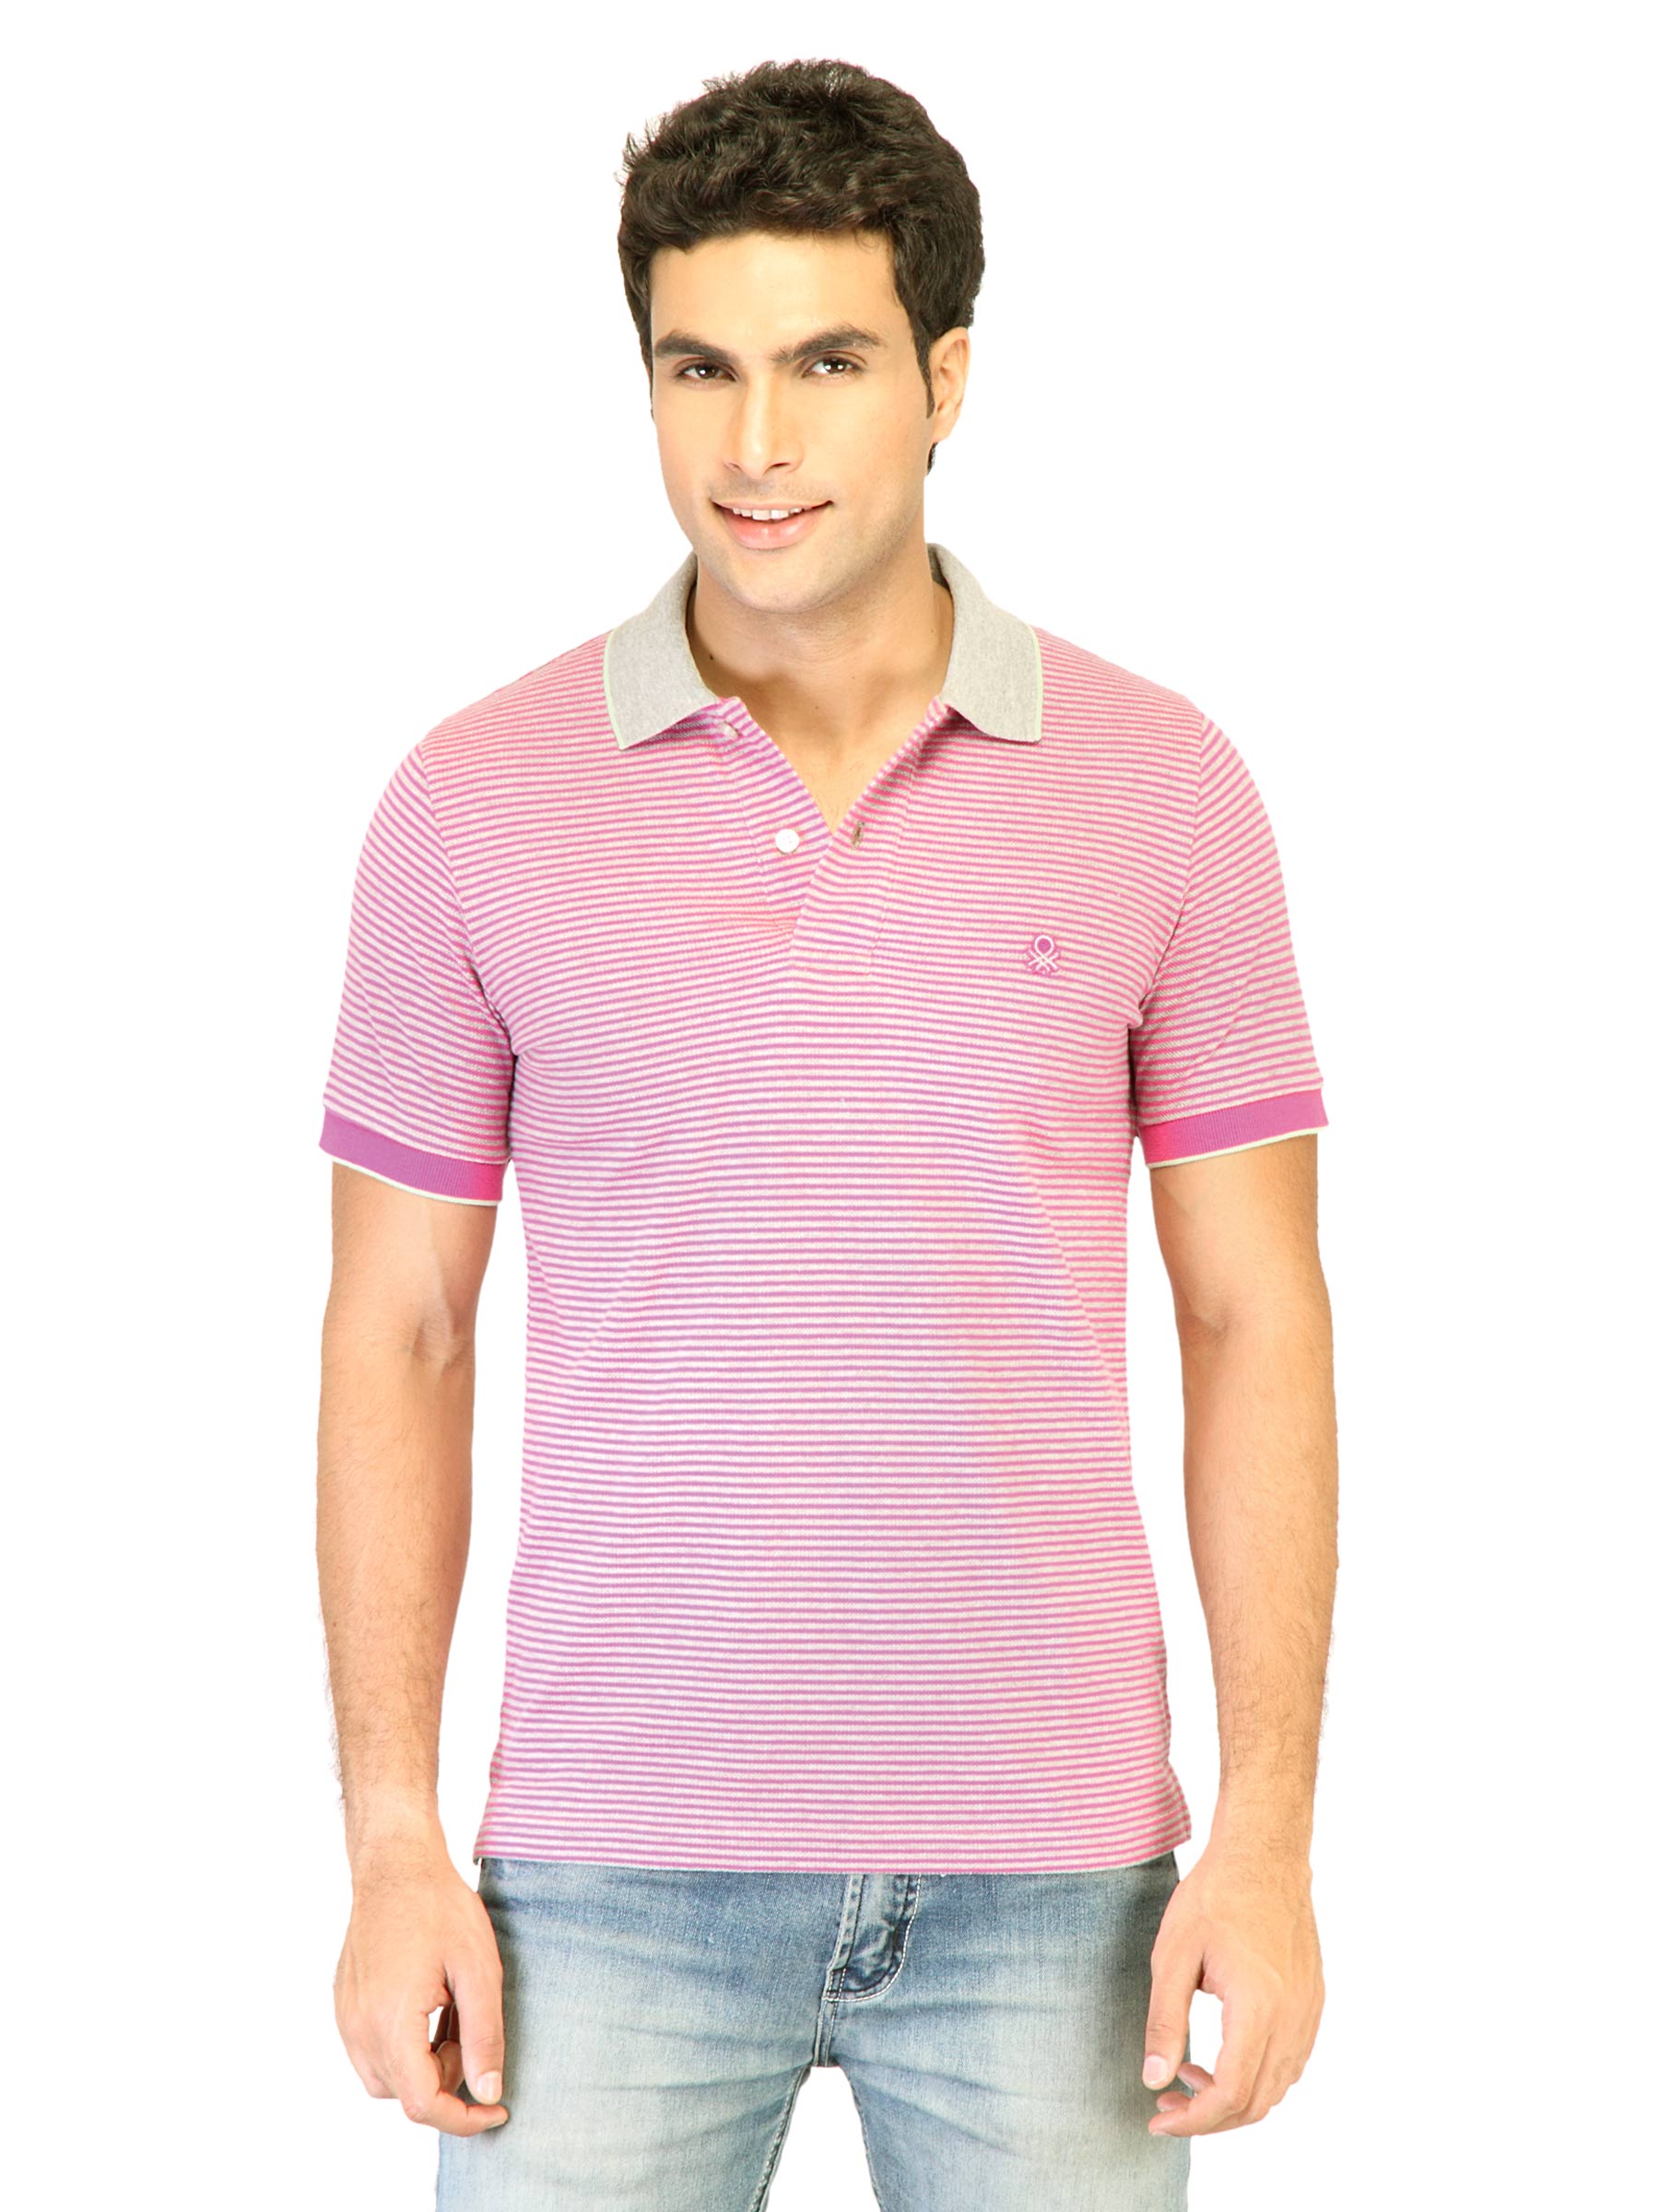 United Colors of Benetton Men Stripes Pink Tshirts